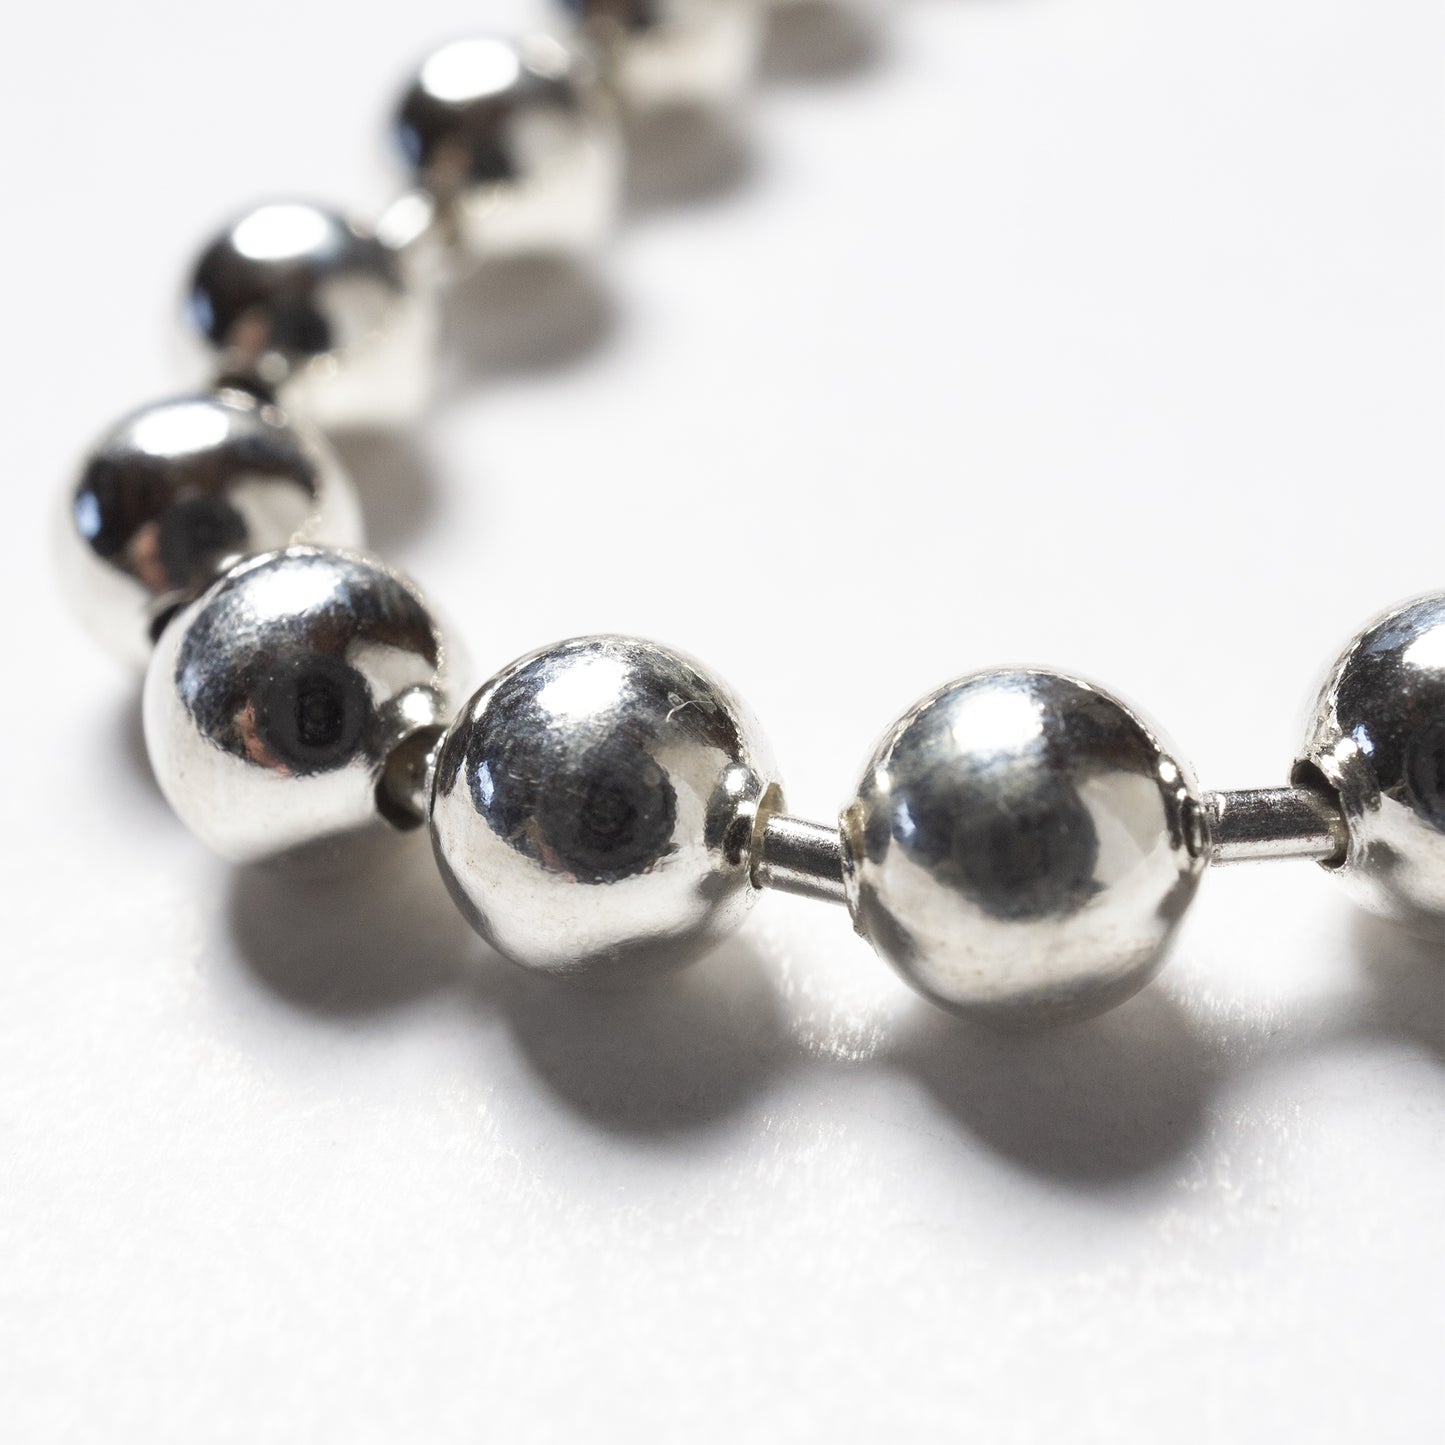 24SS SYMPATHY OF SOUL Style THICK BALL CHAIN BRACELET